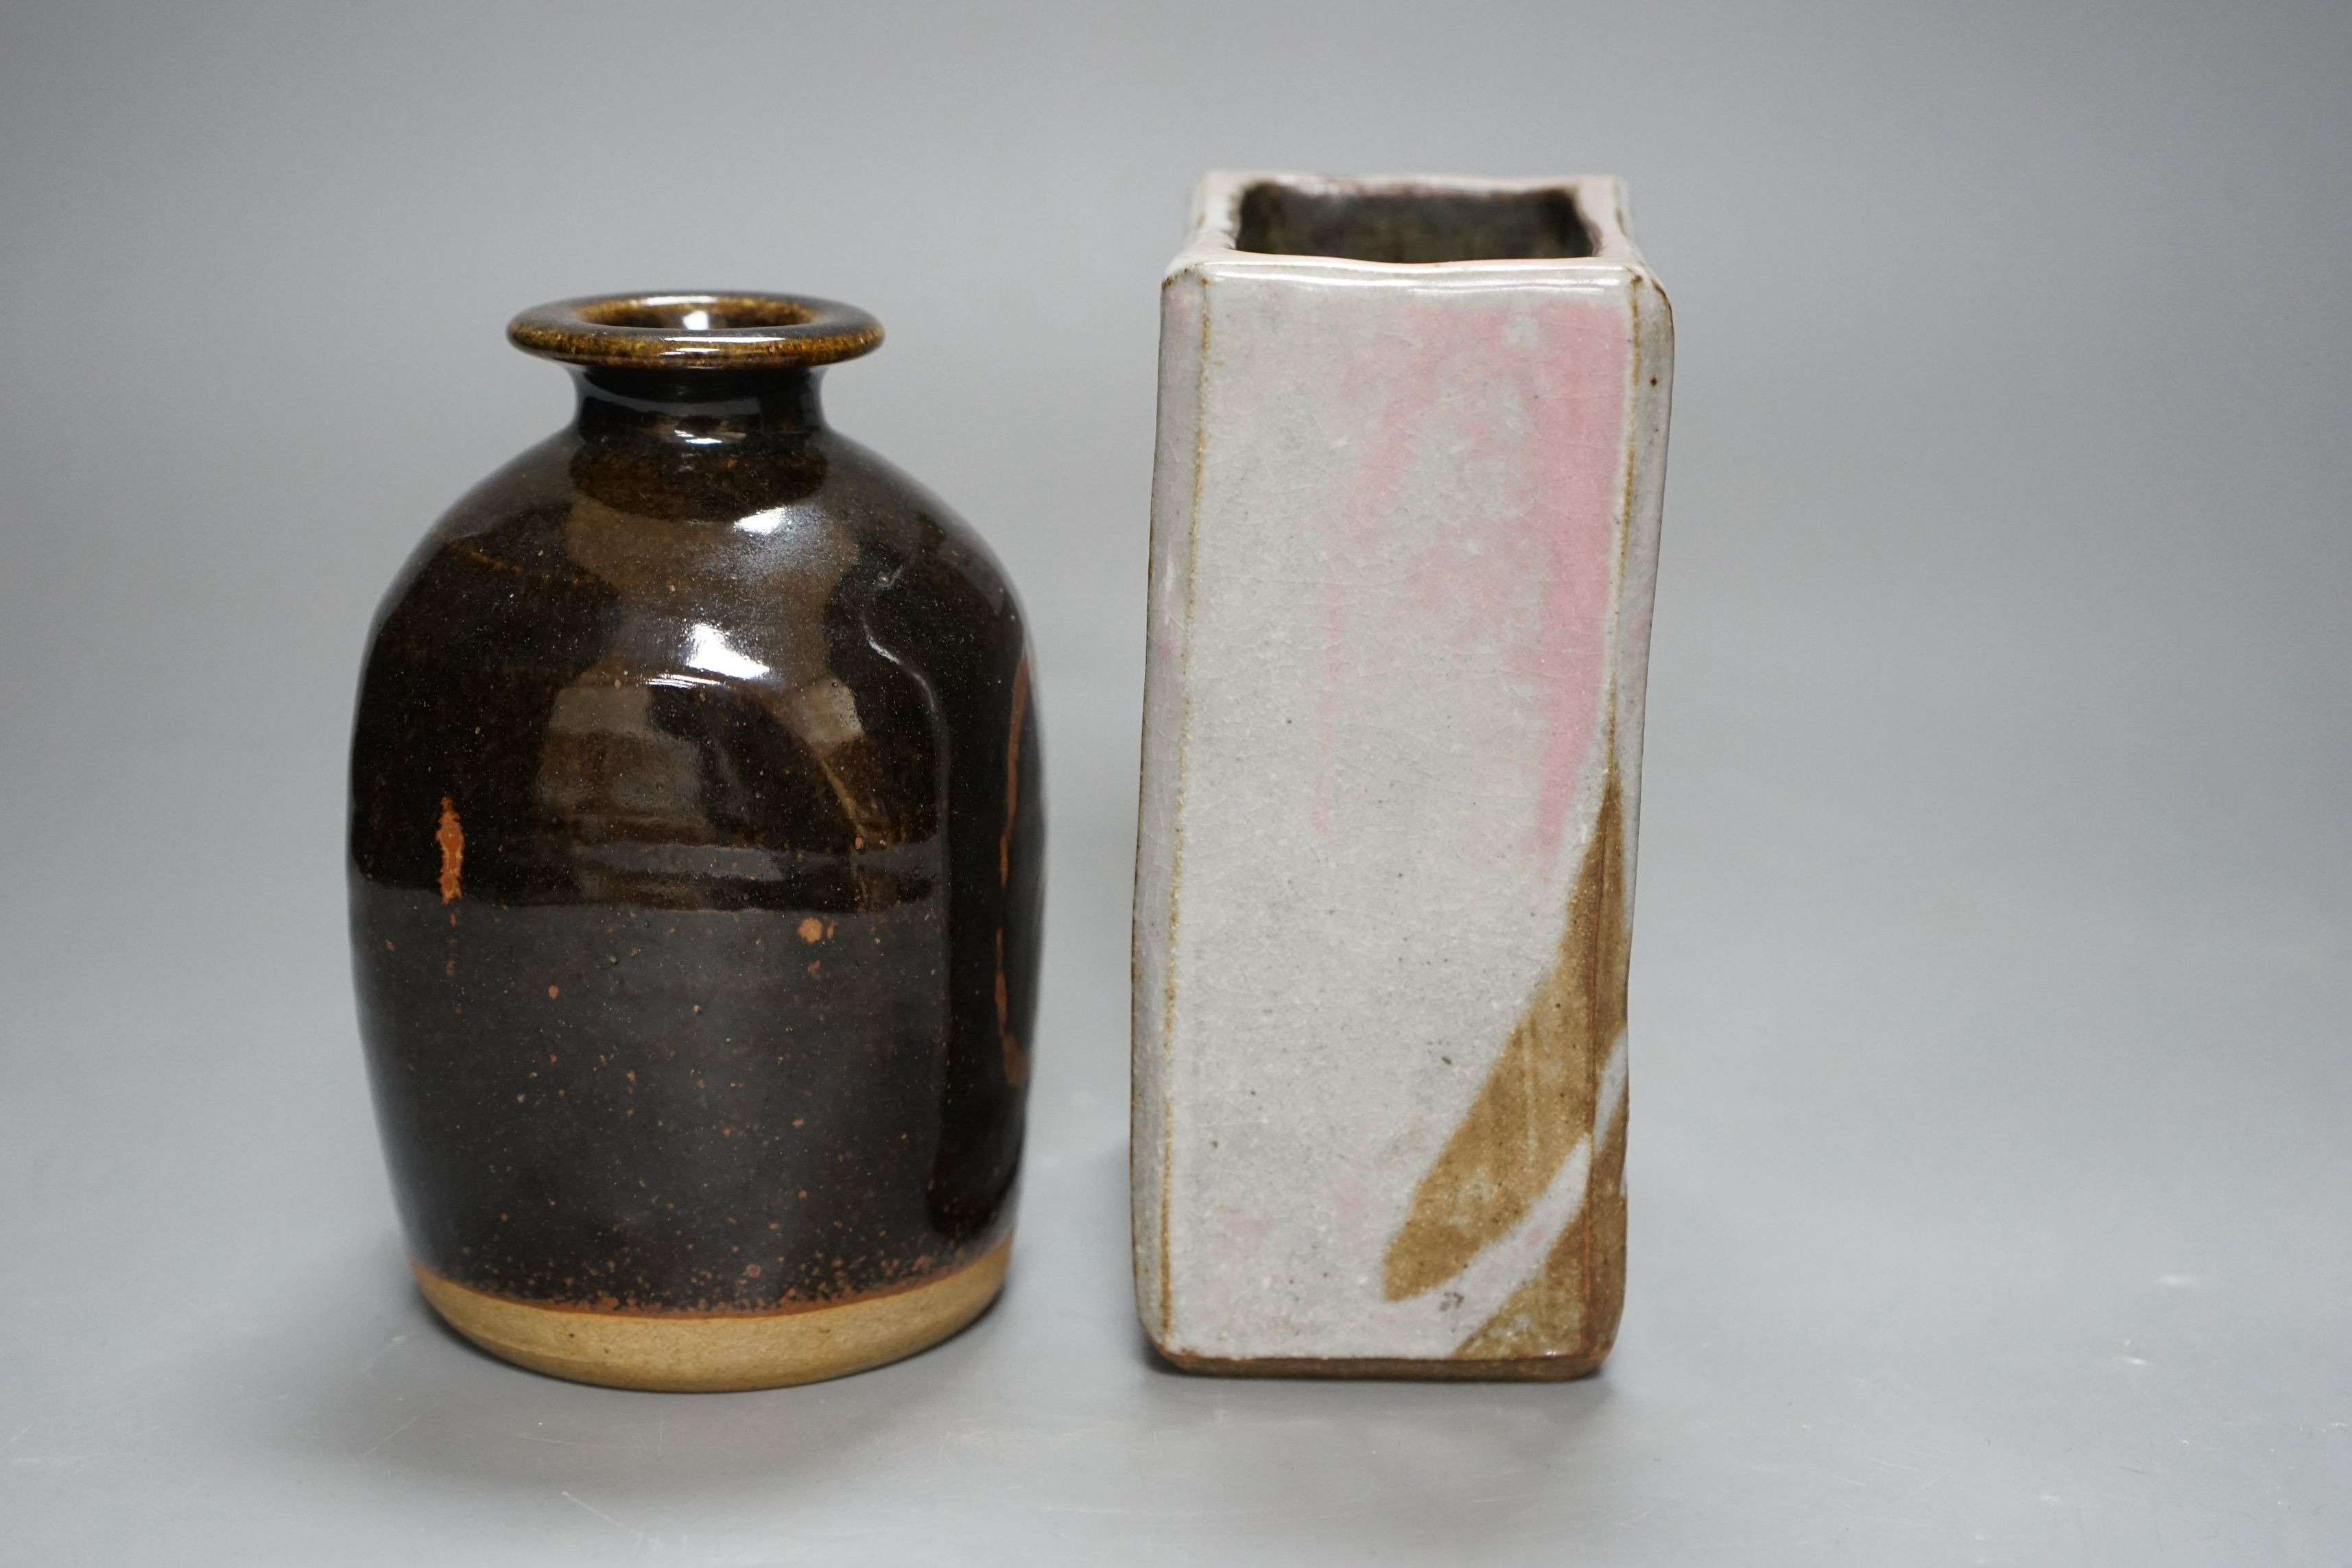 British Studio Pottery; a tenmoku glazed bottle vase, with impressed mark, together with an abstract rectangular blue glaze vase with brown and pink undertones, unmarked, 15cm tall, (2)